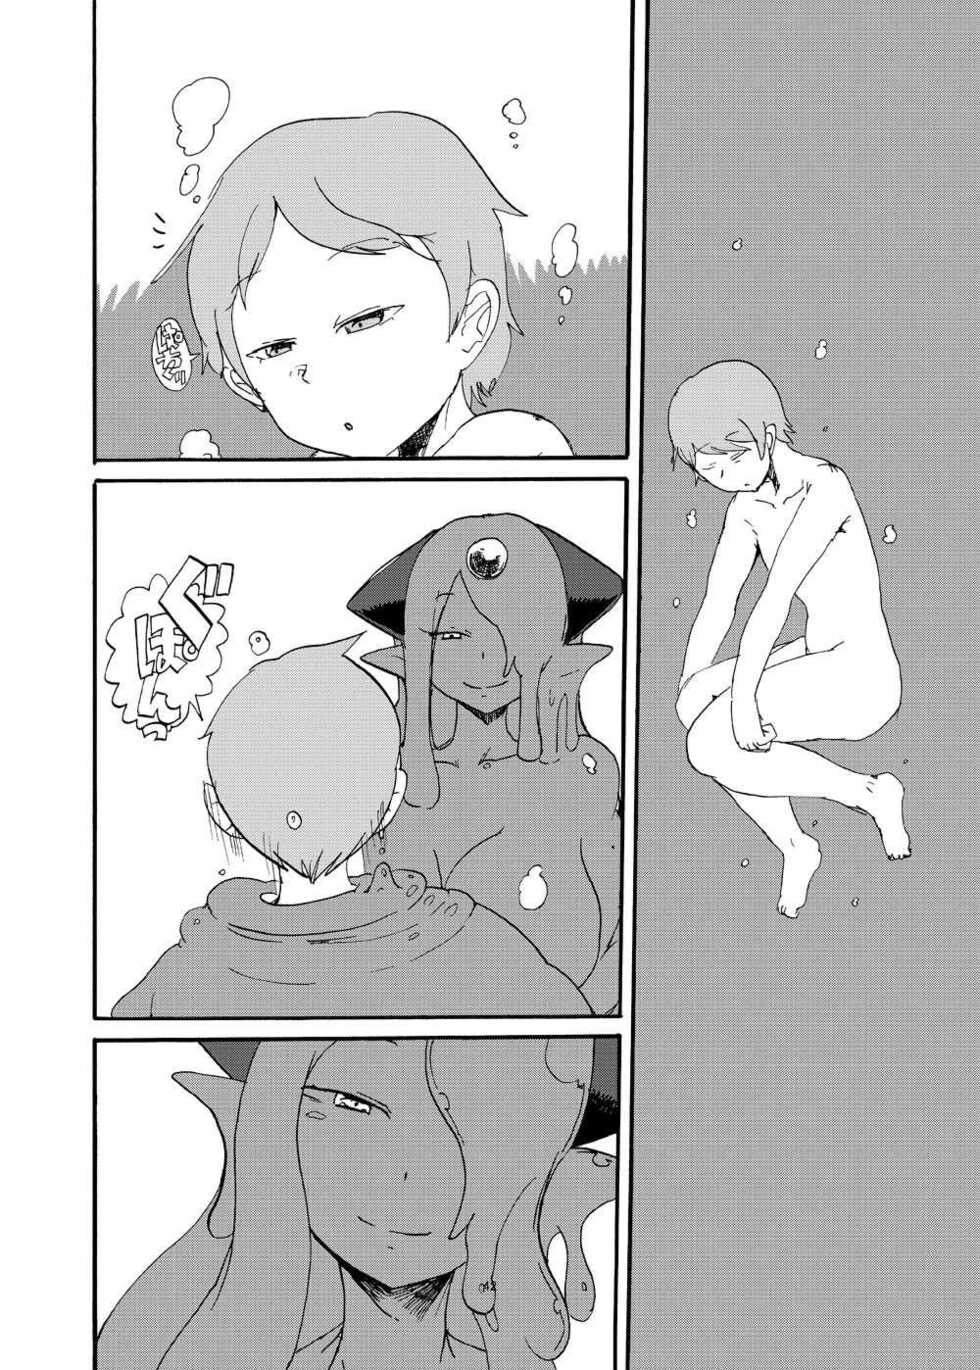 [Setouchi Pharm (Setouchi)] Fuyu no MonQue Bon (Monster Girl Quest!) 2 [Russian] [﻿stycler94] [Digital] [Incomplete] - Page 9